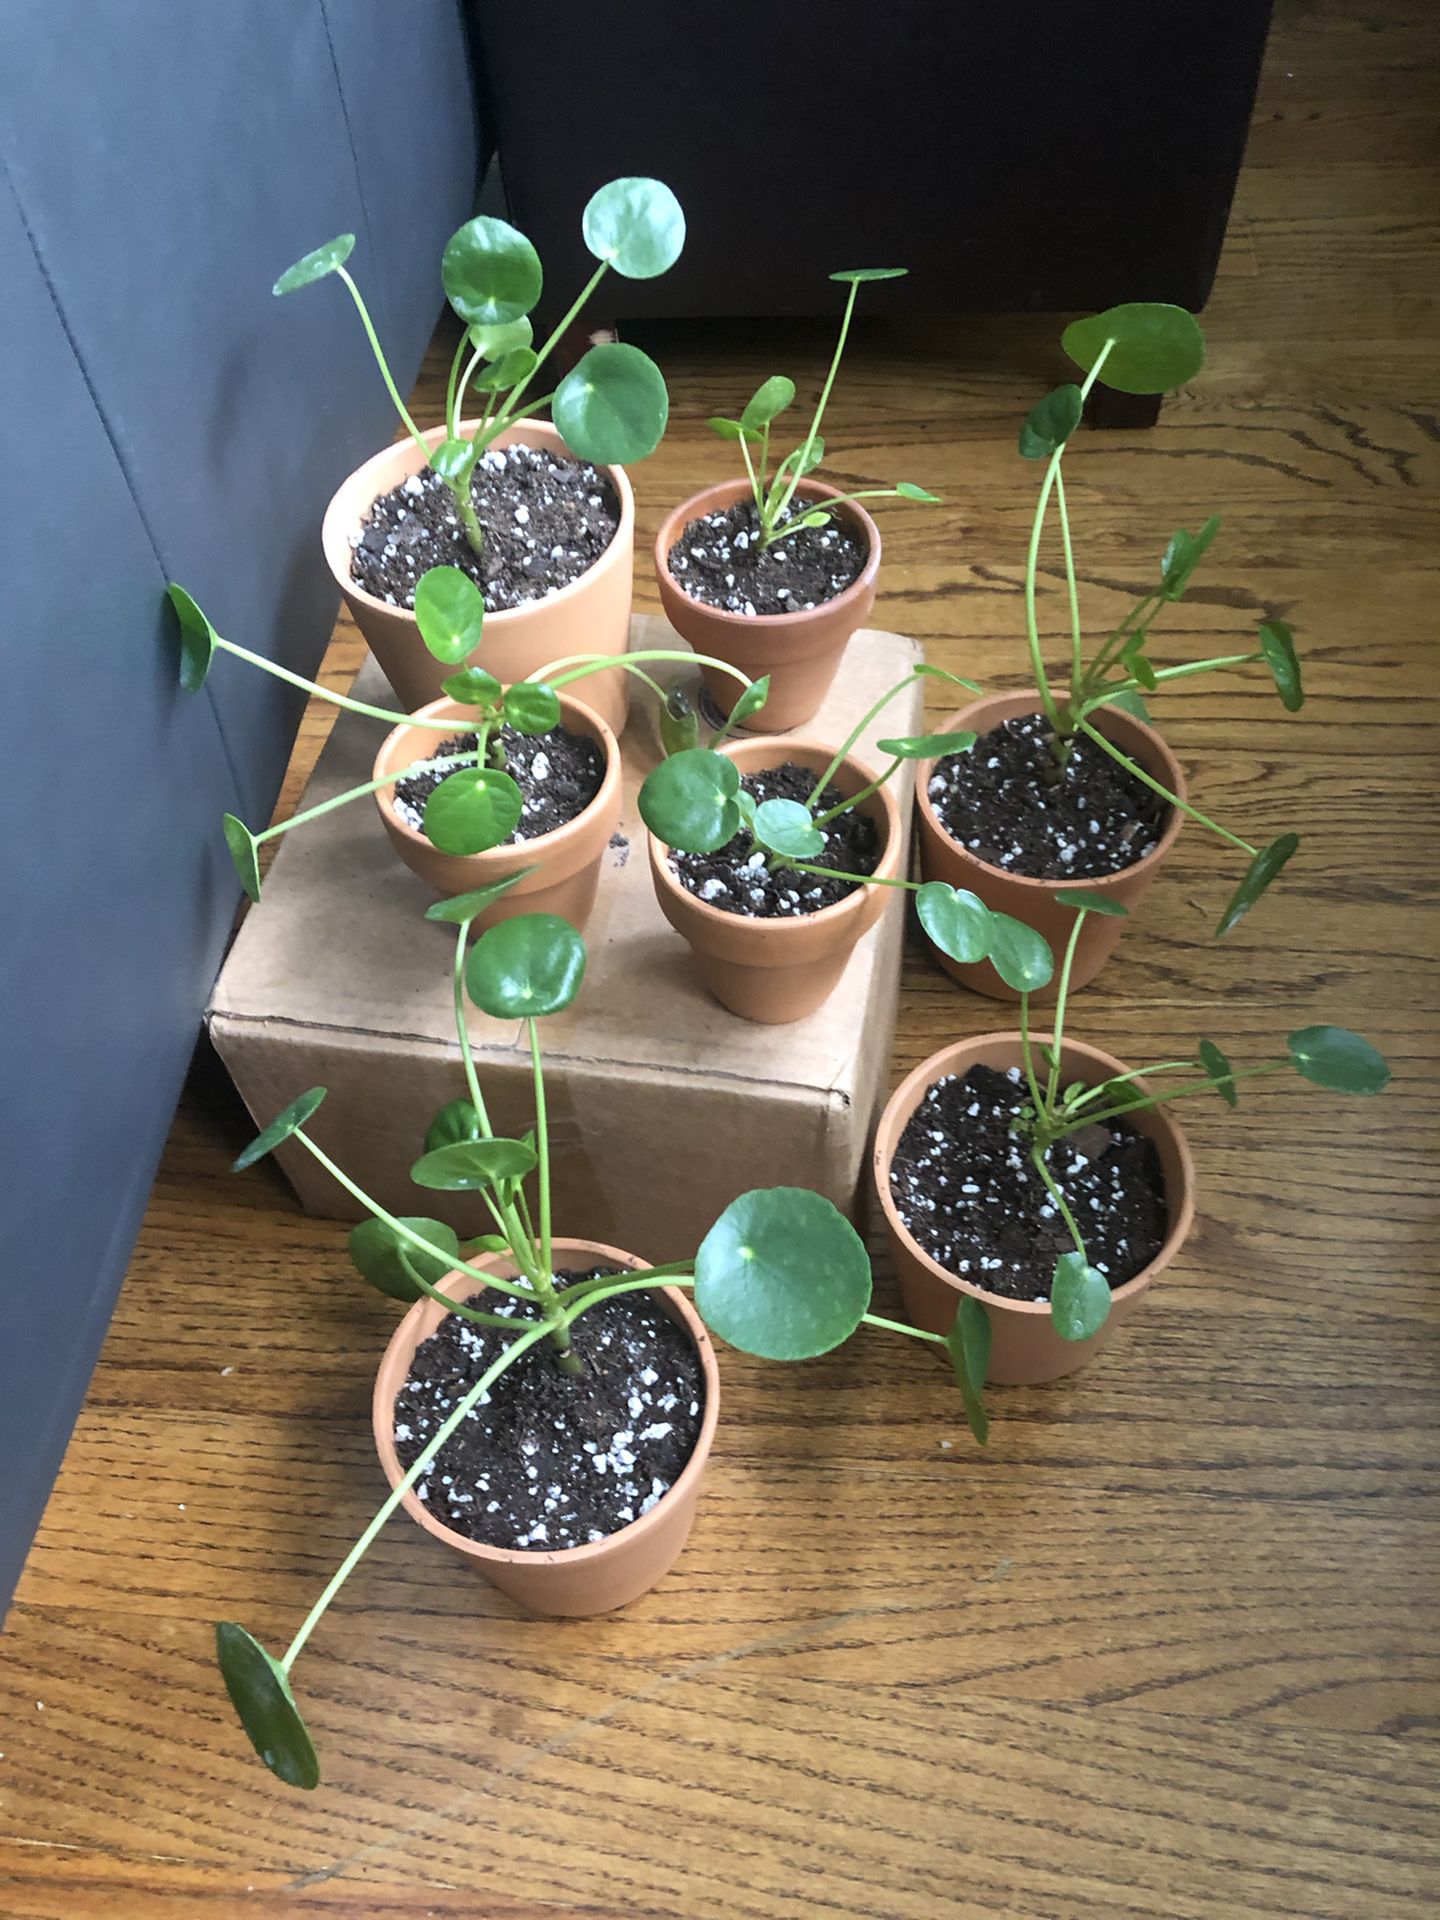 Chinese money plants, pilea peperomioides - $5 and $10